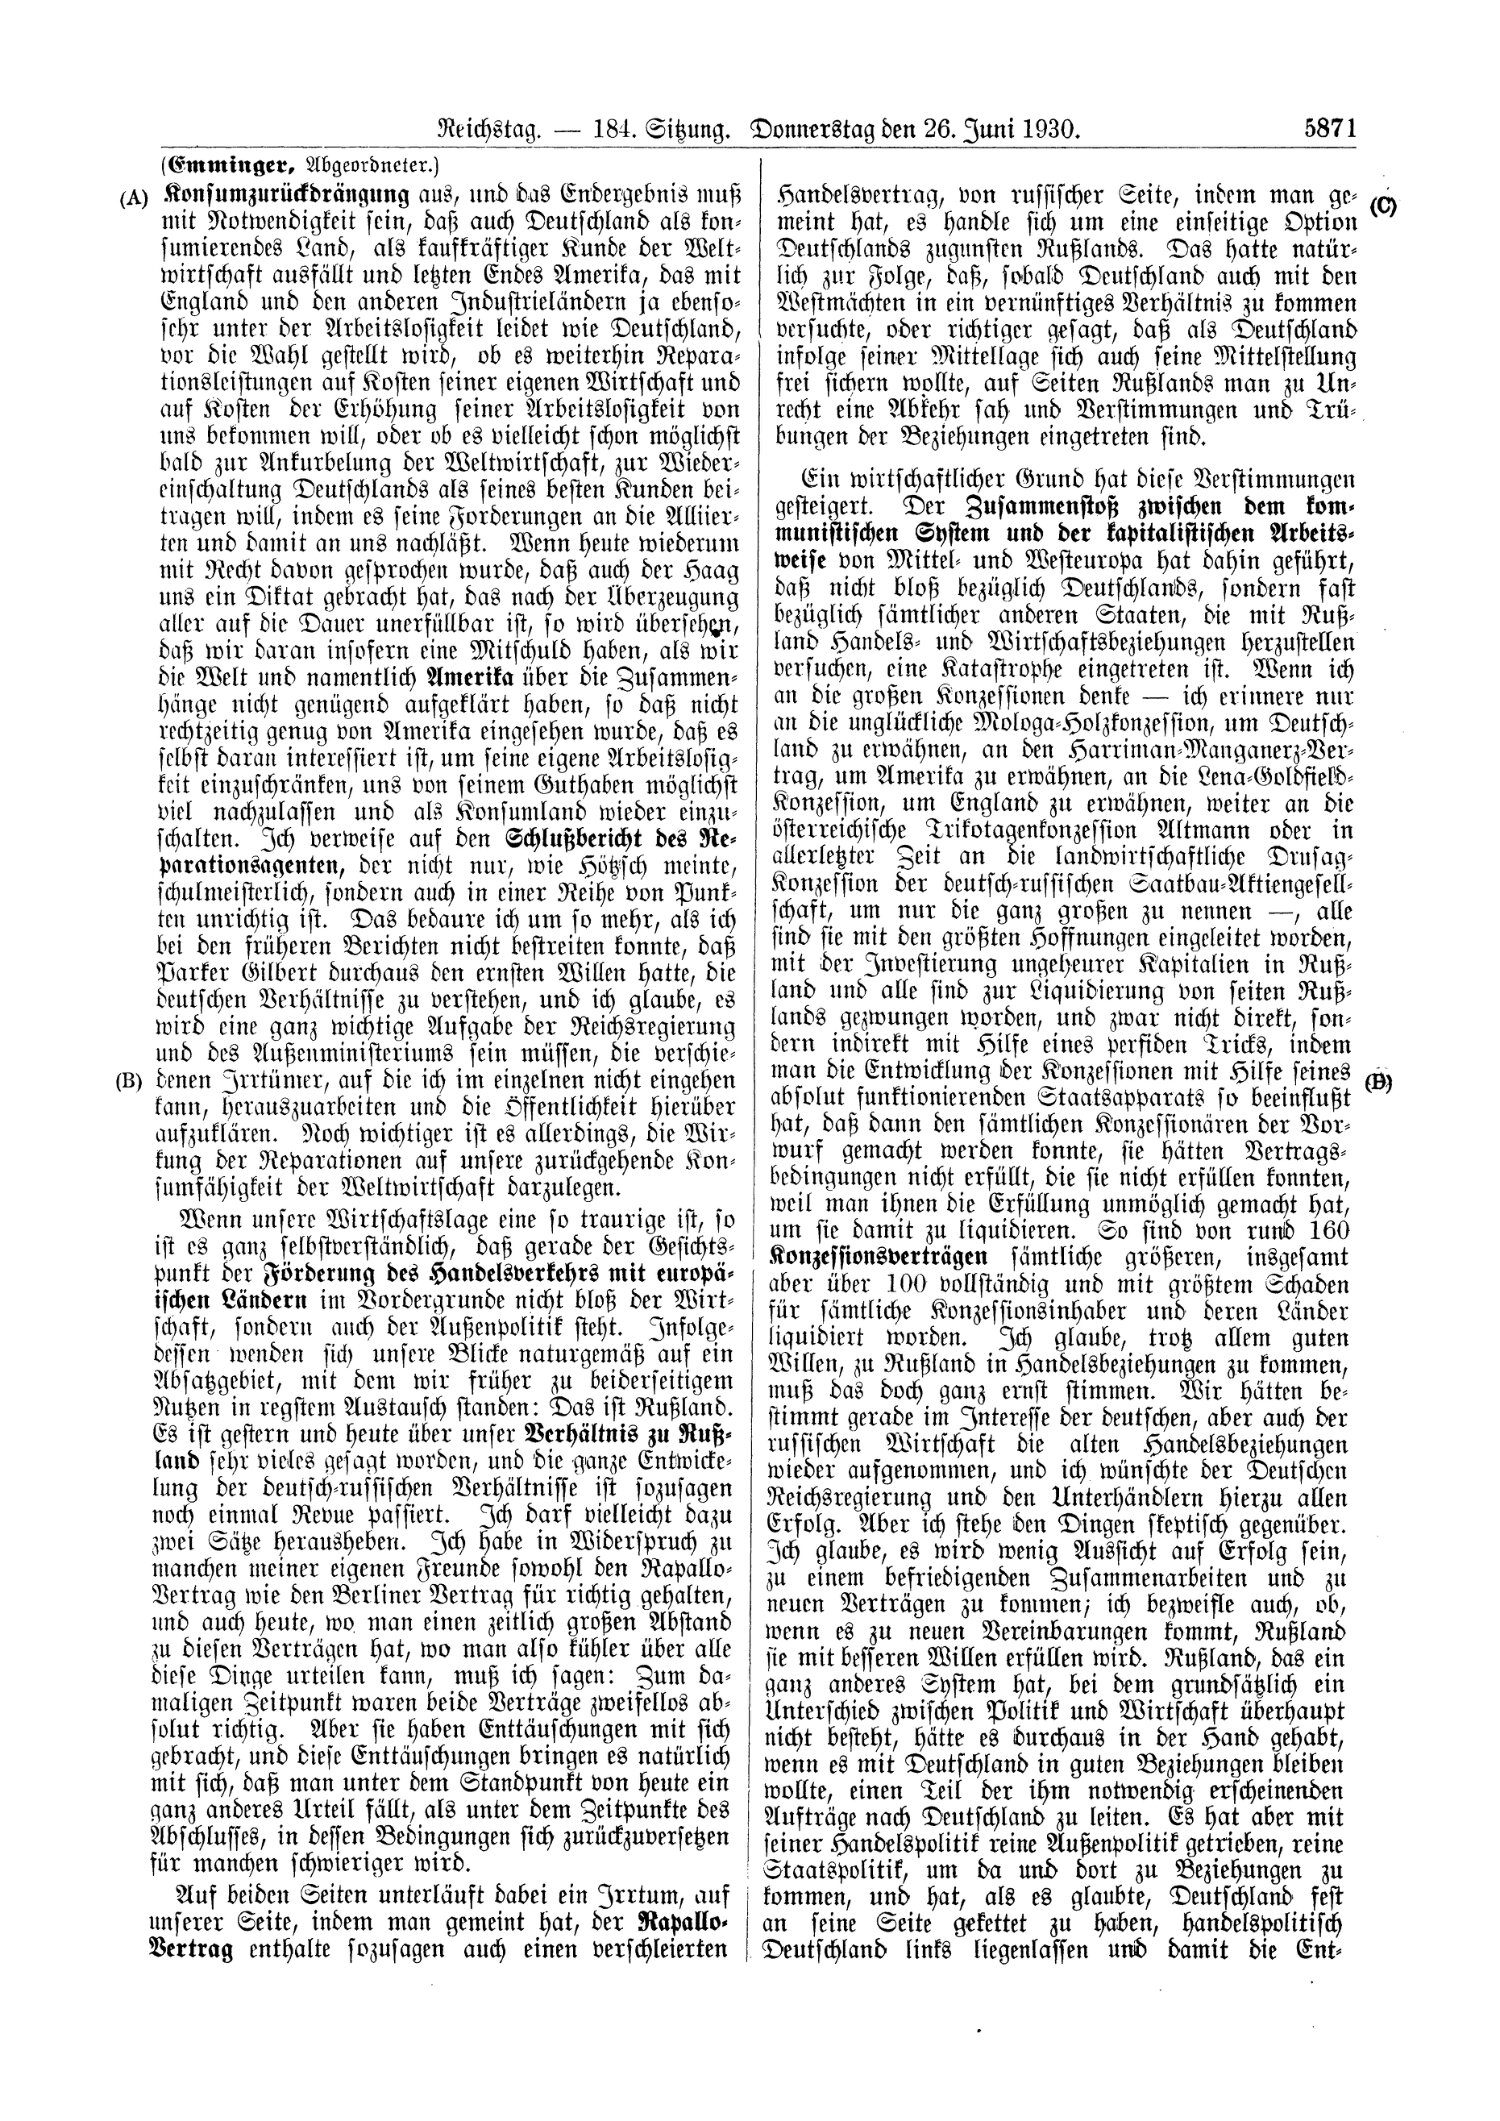 Scan of page 5871